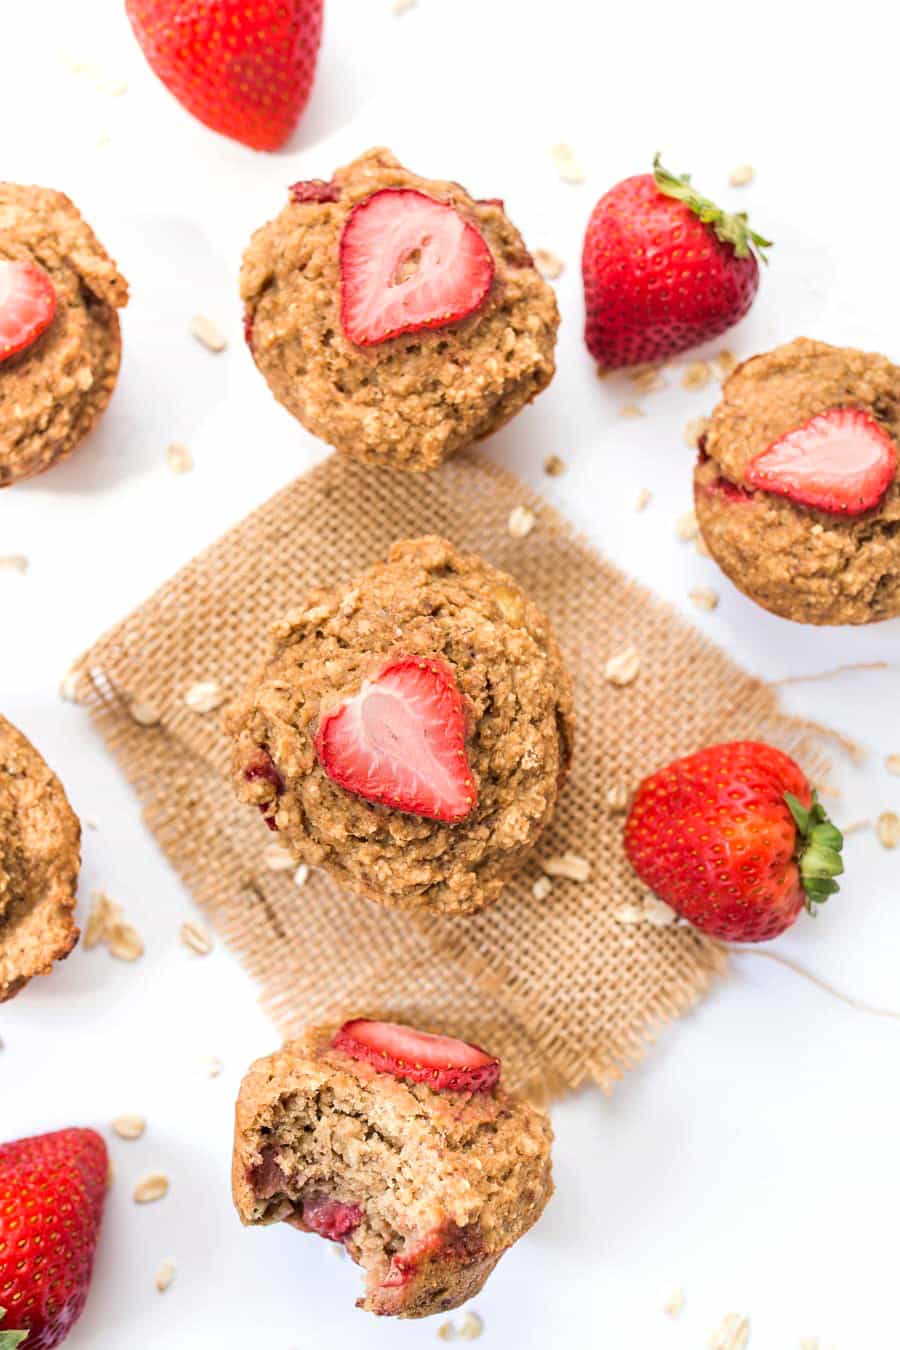 Healthy banana oatmeal muffins with strawberries on table